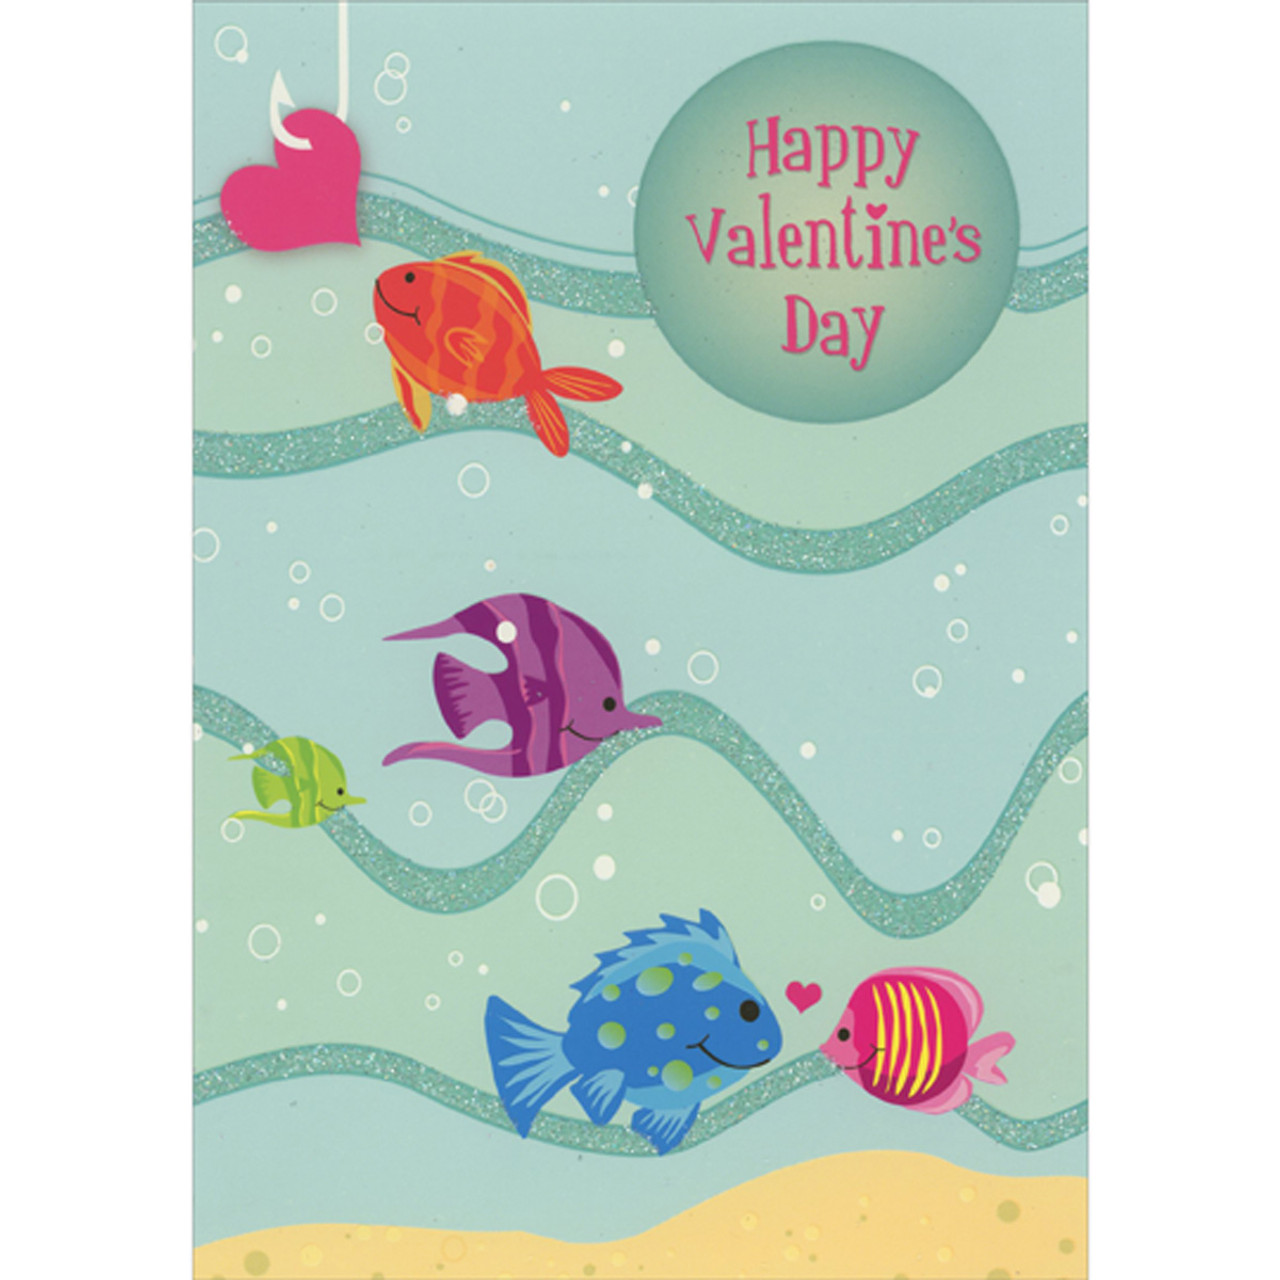 Five Colorful Fish, Pink Heart on Hook and Sparkling Blue Waves Juvenile  Valentine's Day Card for Kids